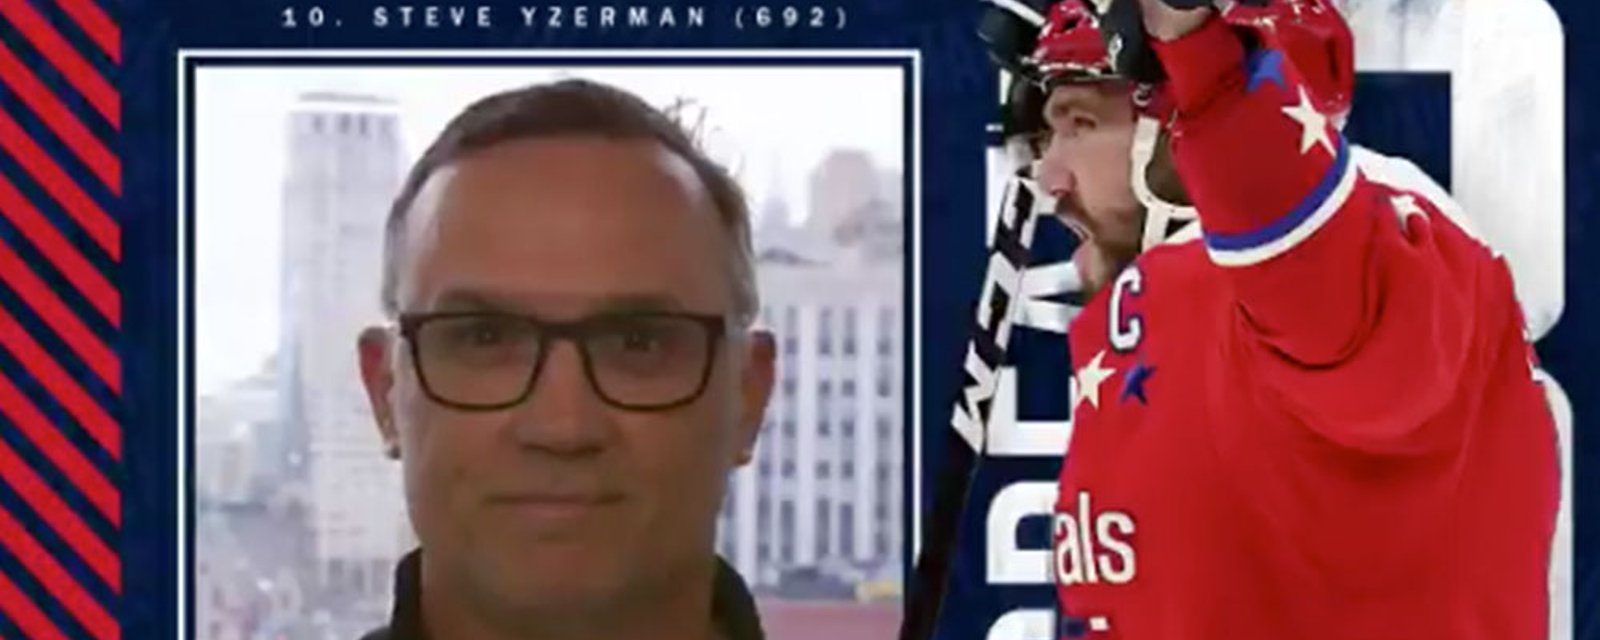 Yzerman sends a personal message to Ovechkin after the Caps legend passes Stevie Y on the all-time goal scoring